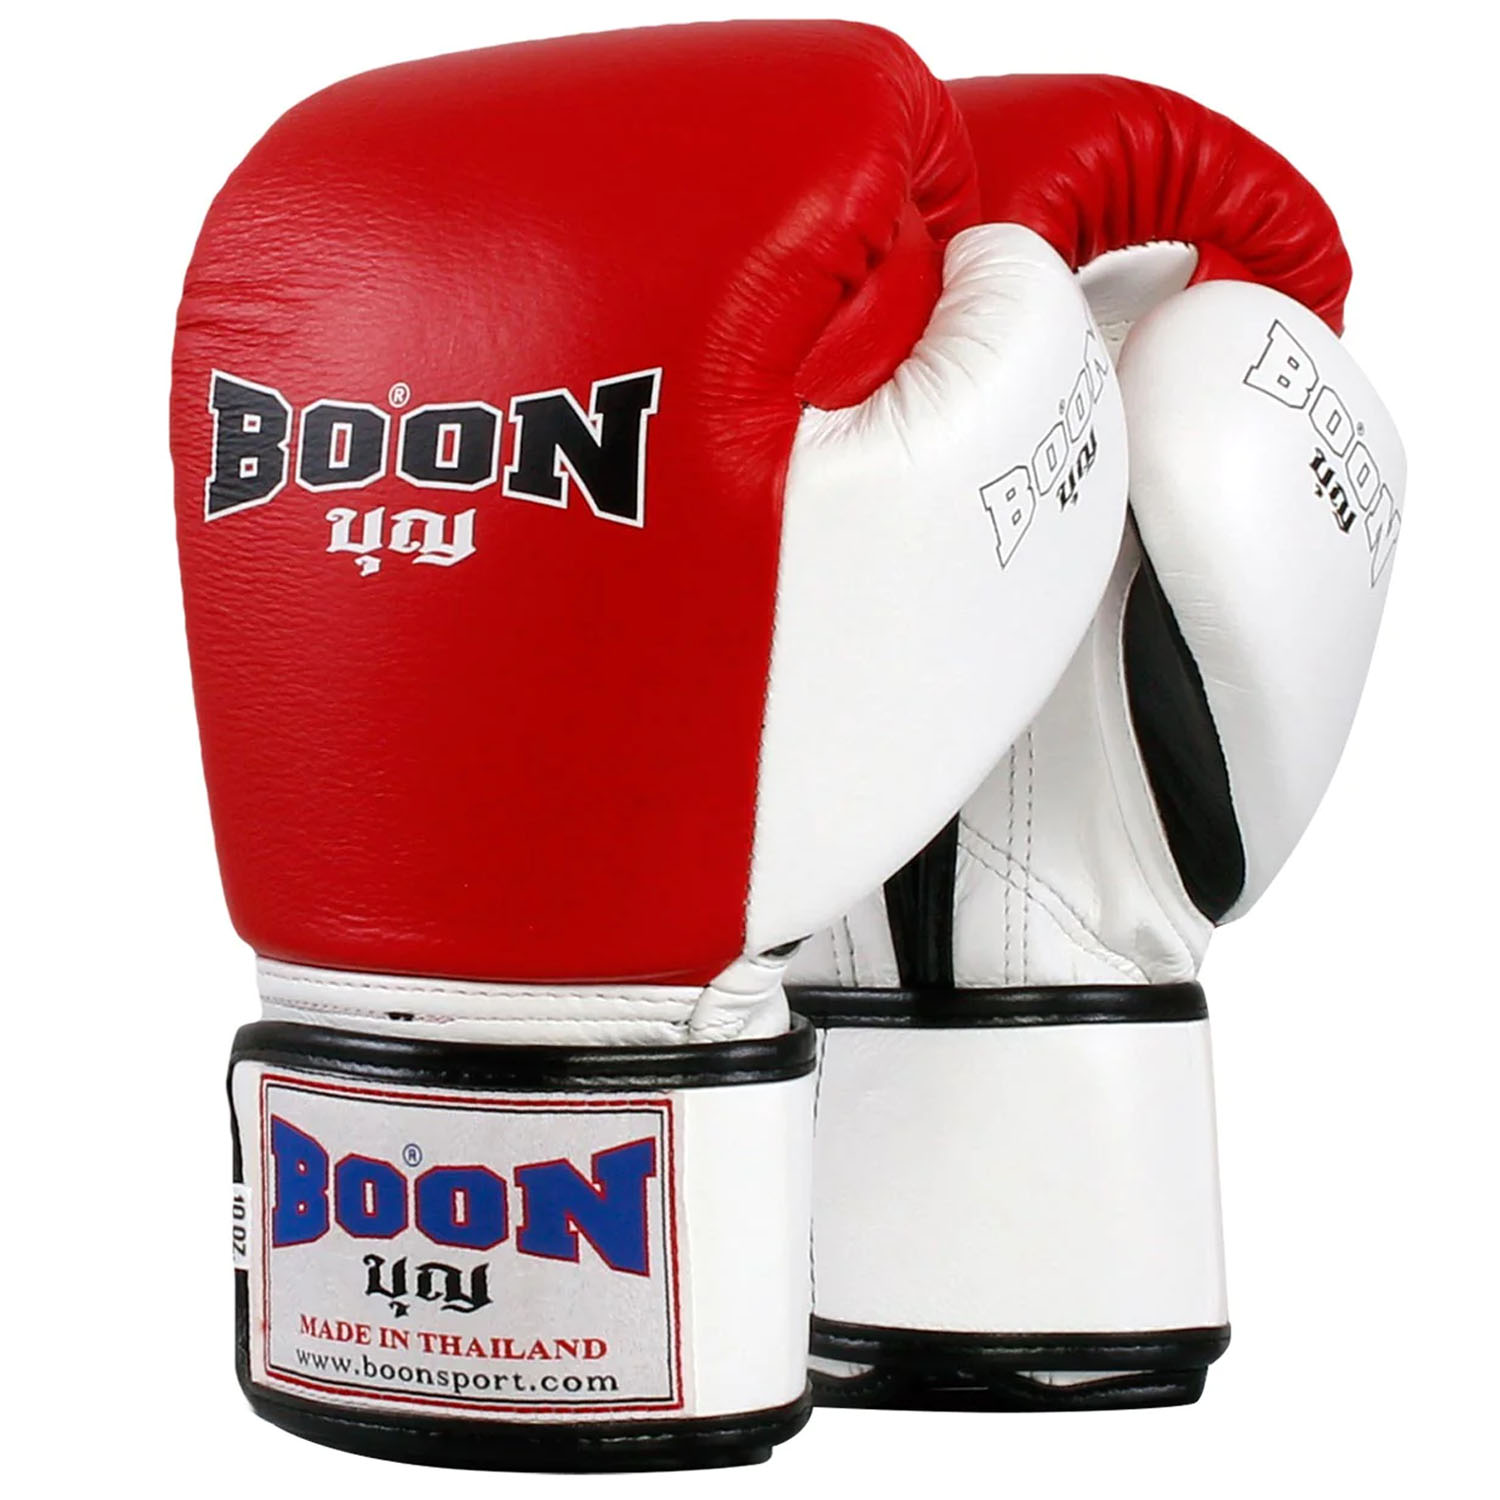 BOON Boxing Gloves, BGCBK, Compact Velcro, red-white, 10 Oz